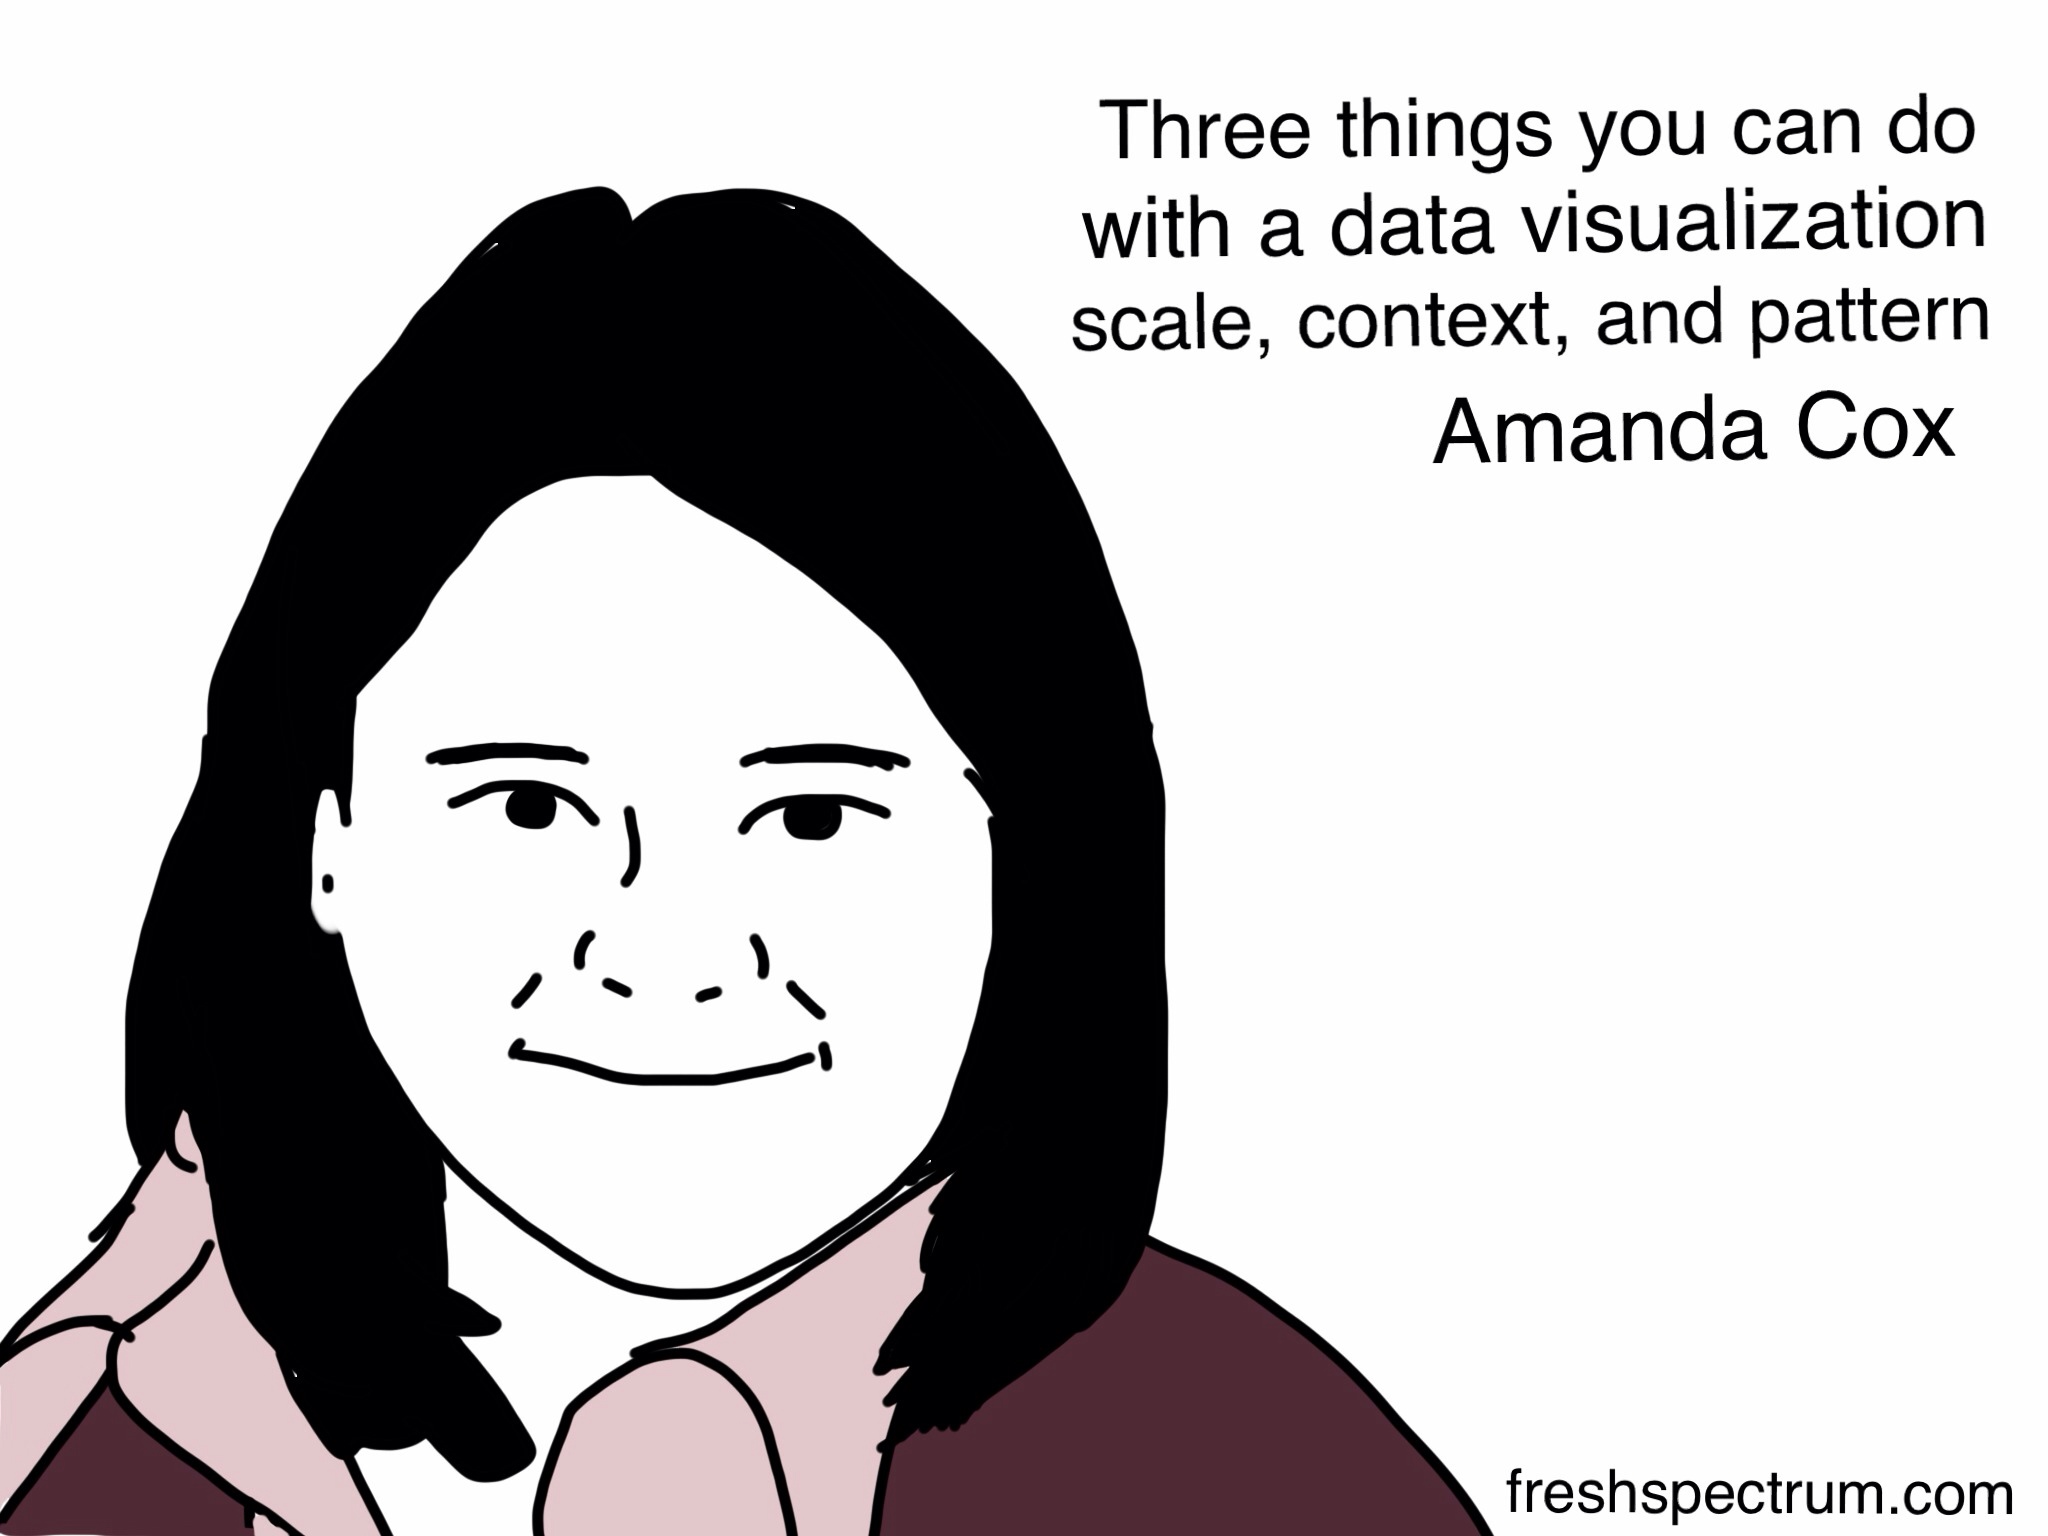 Amanda Cox, three things you can do with a data visualization